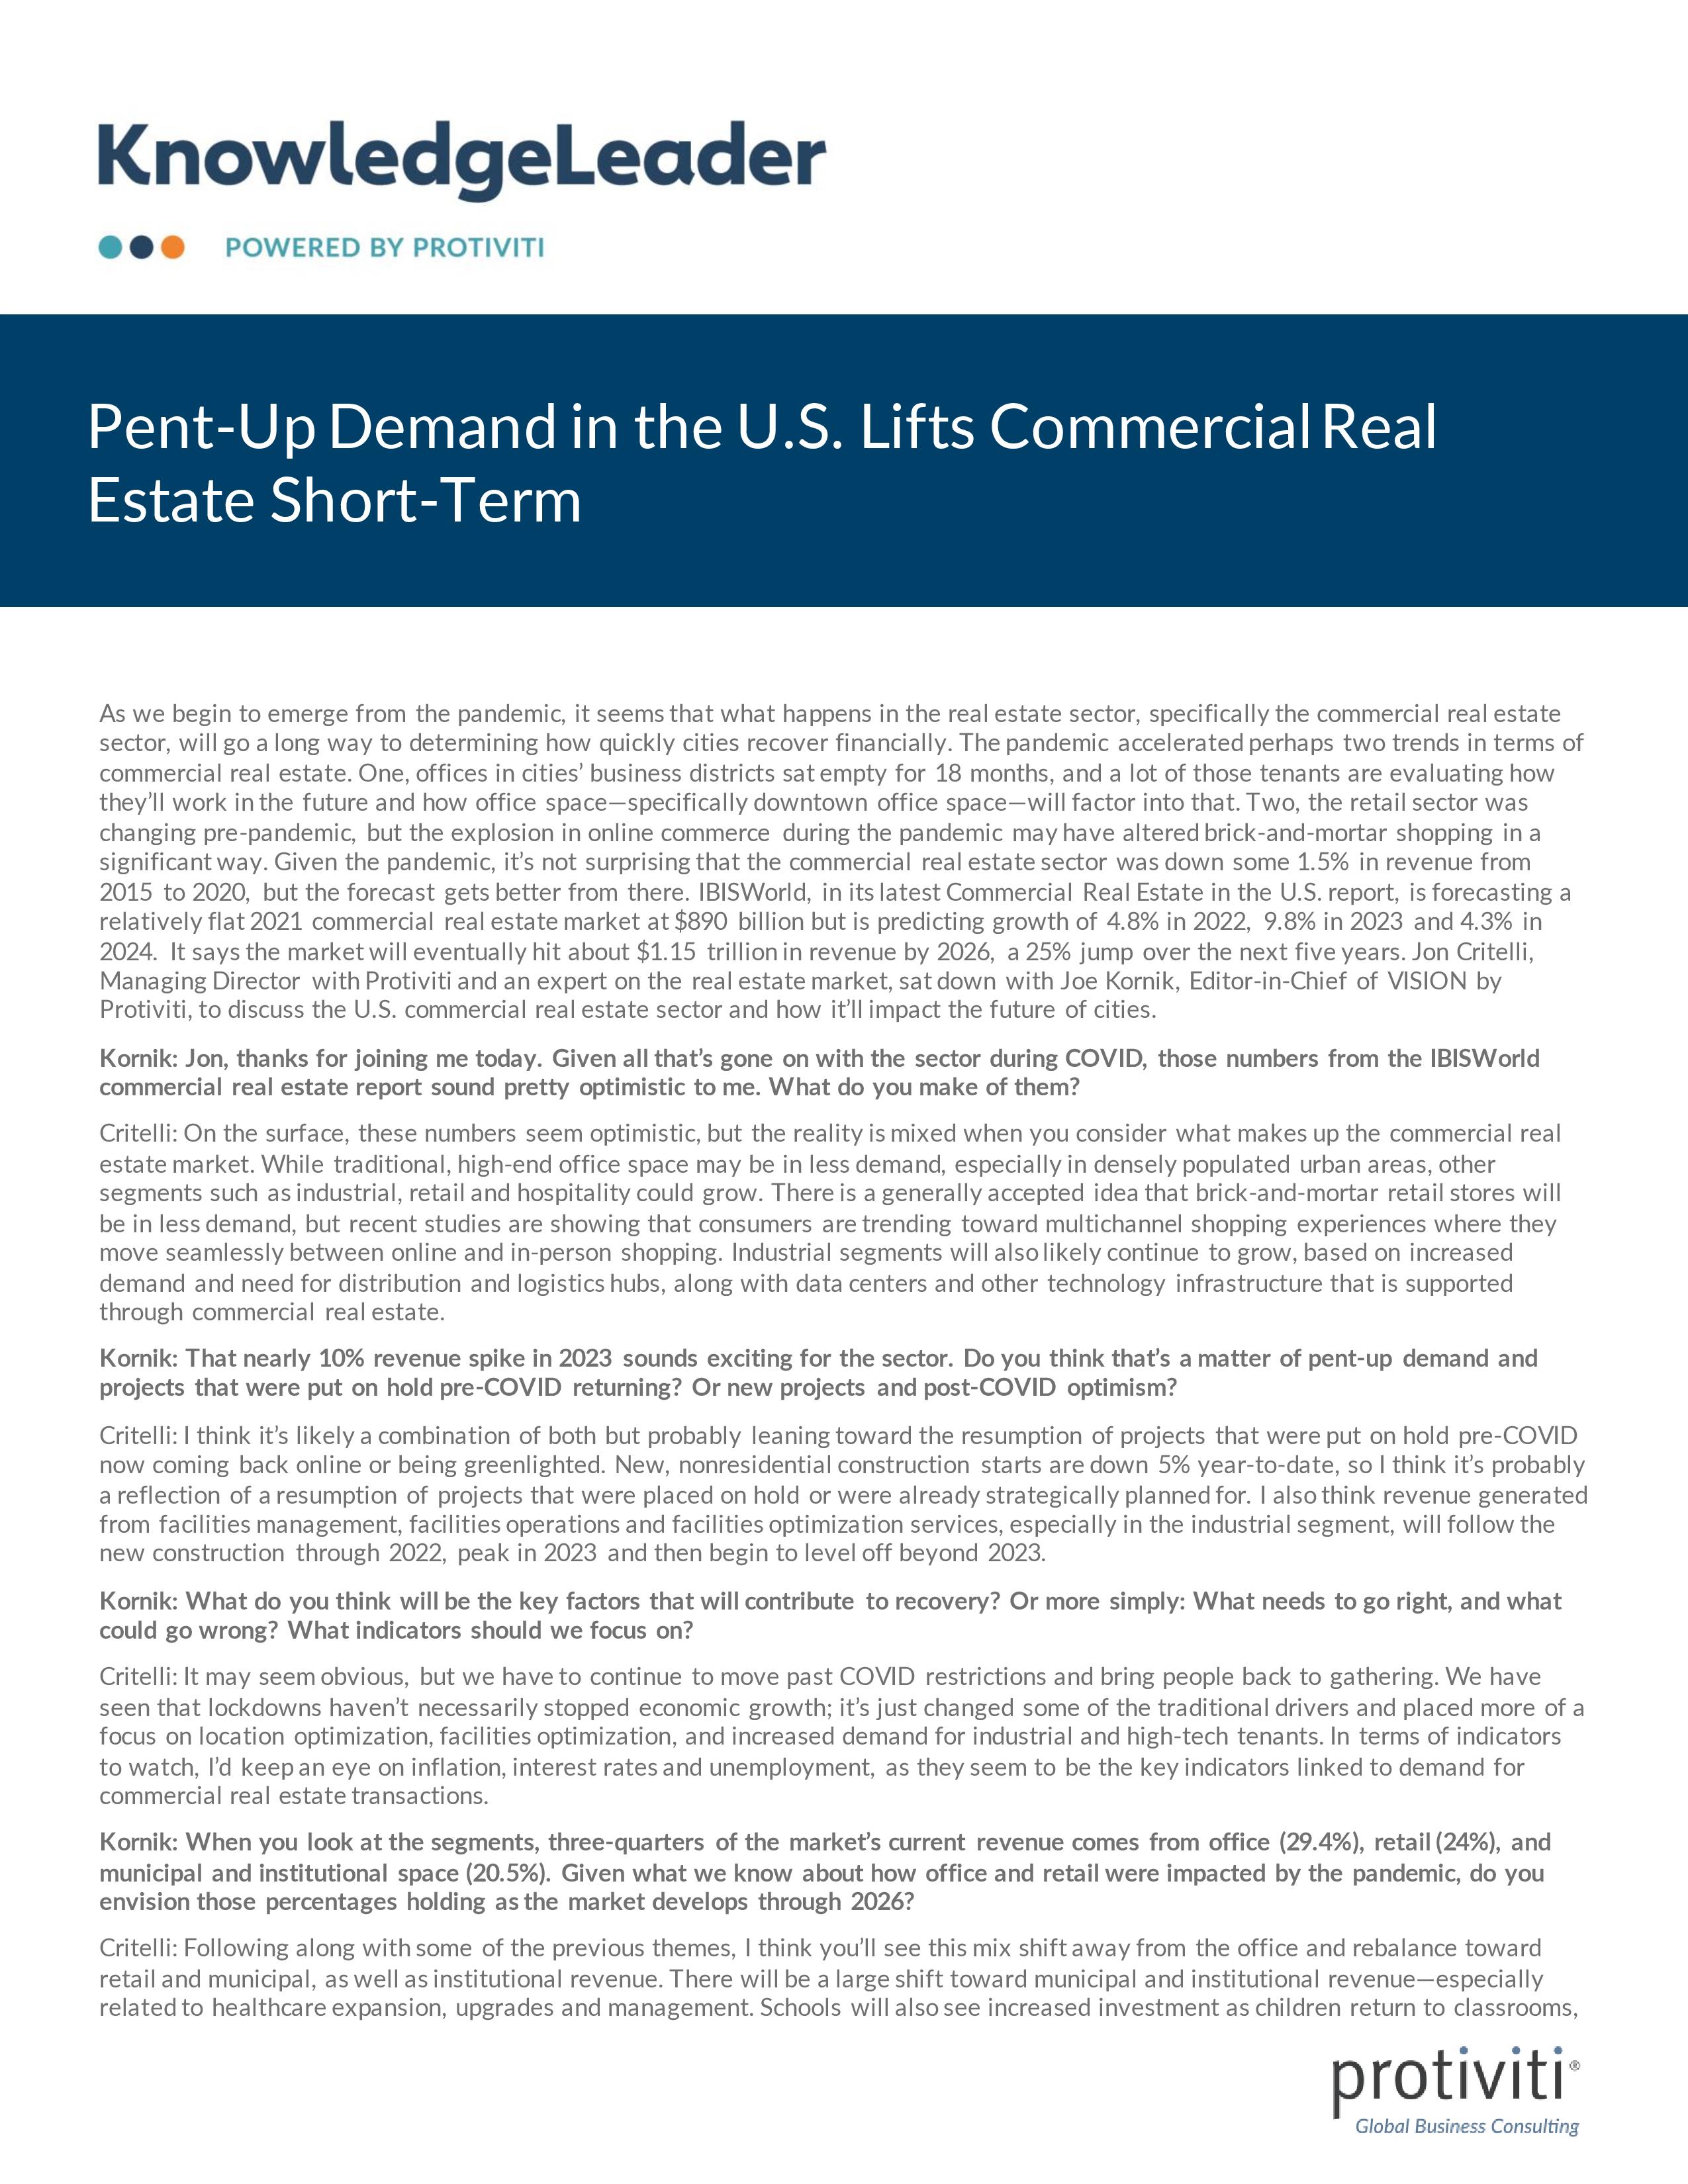 Screenshot of the first page of Pent-Up Demand in the U.S. Lifts Commercial Real Estate Short-Term